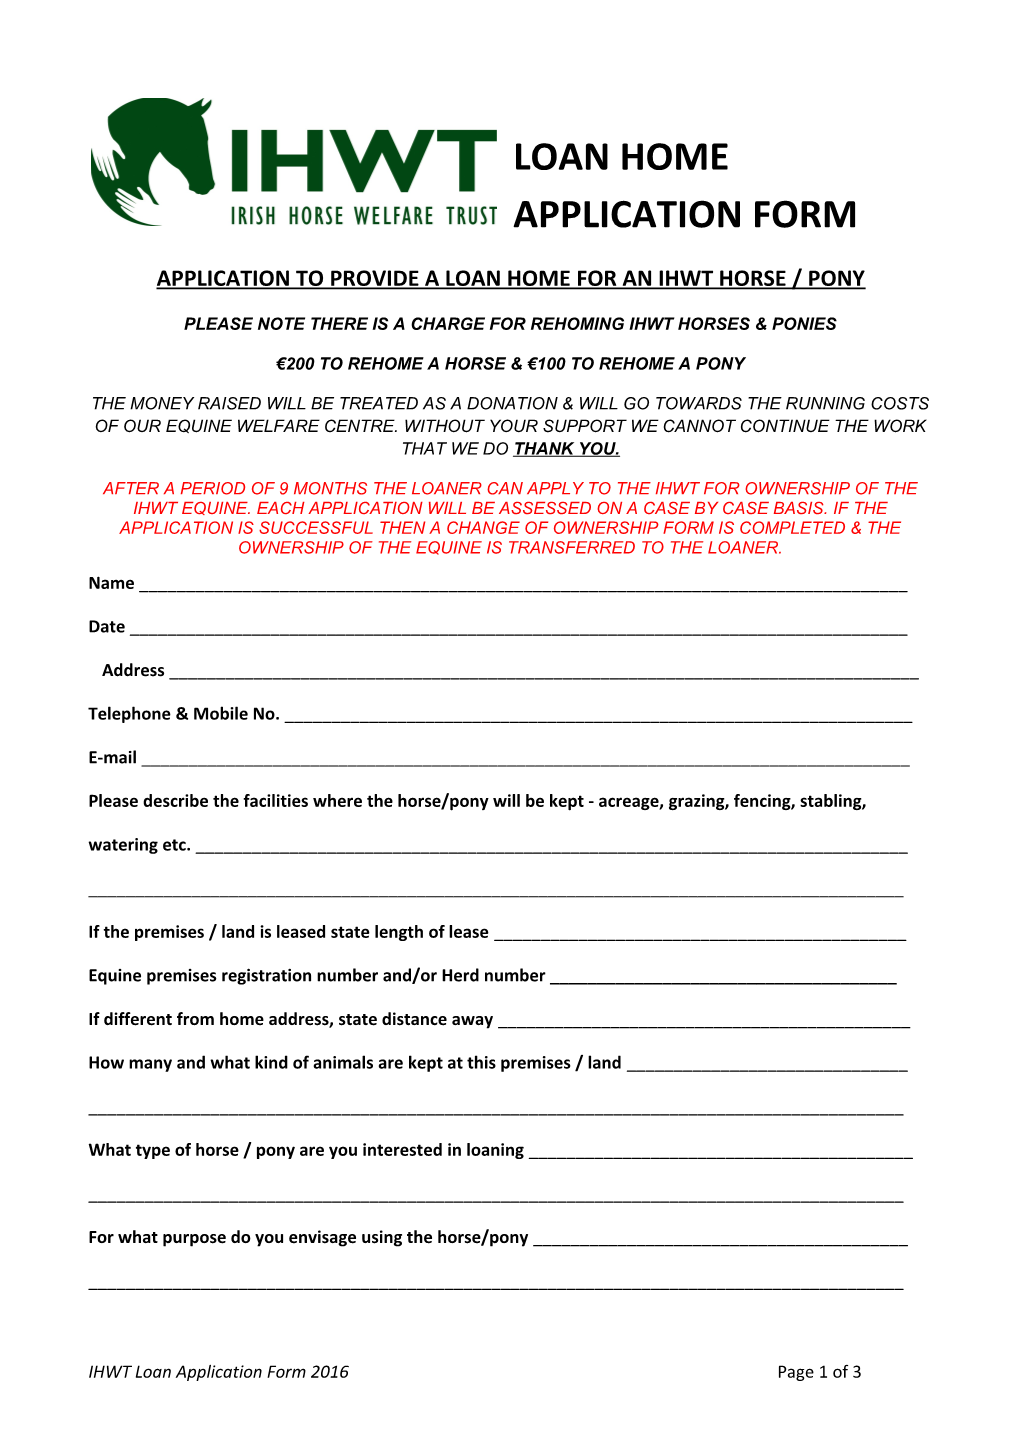 Application to Provide a Loan Home for an Ihwt Horse / Pony